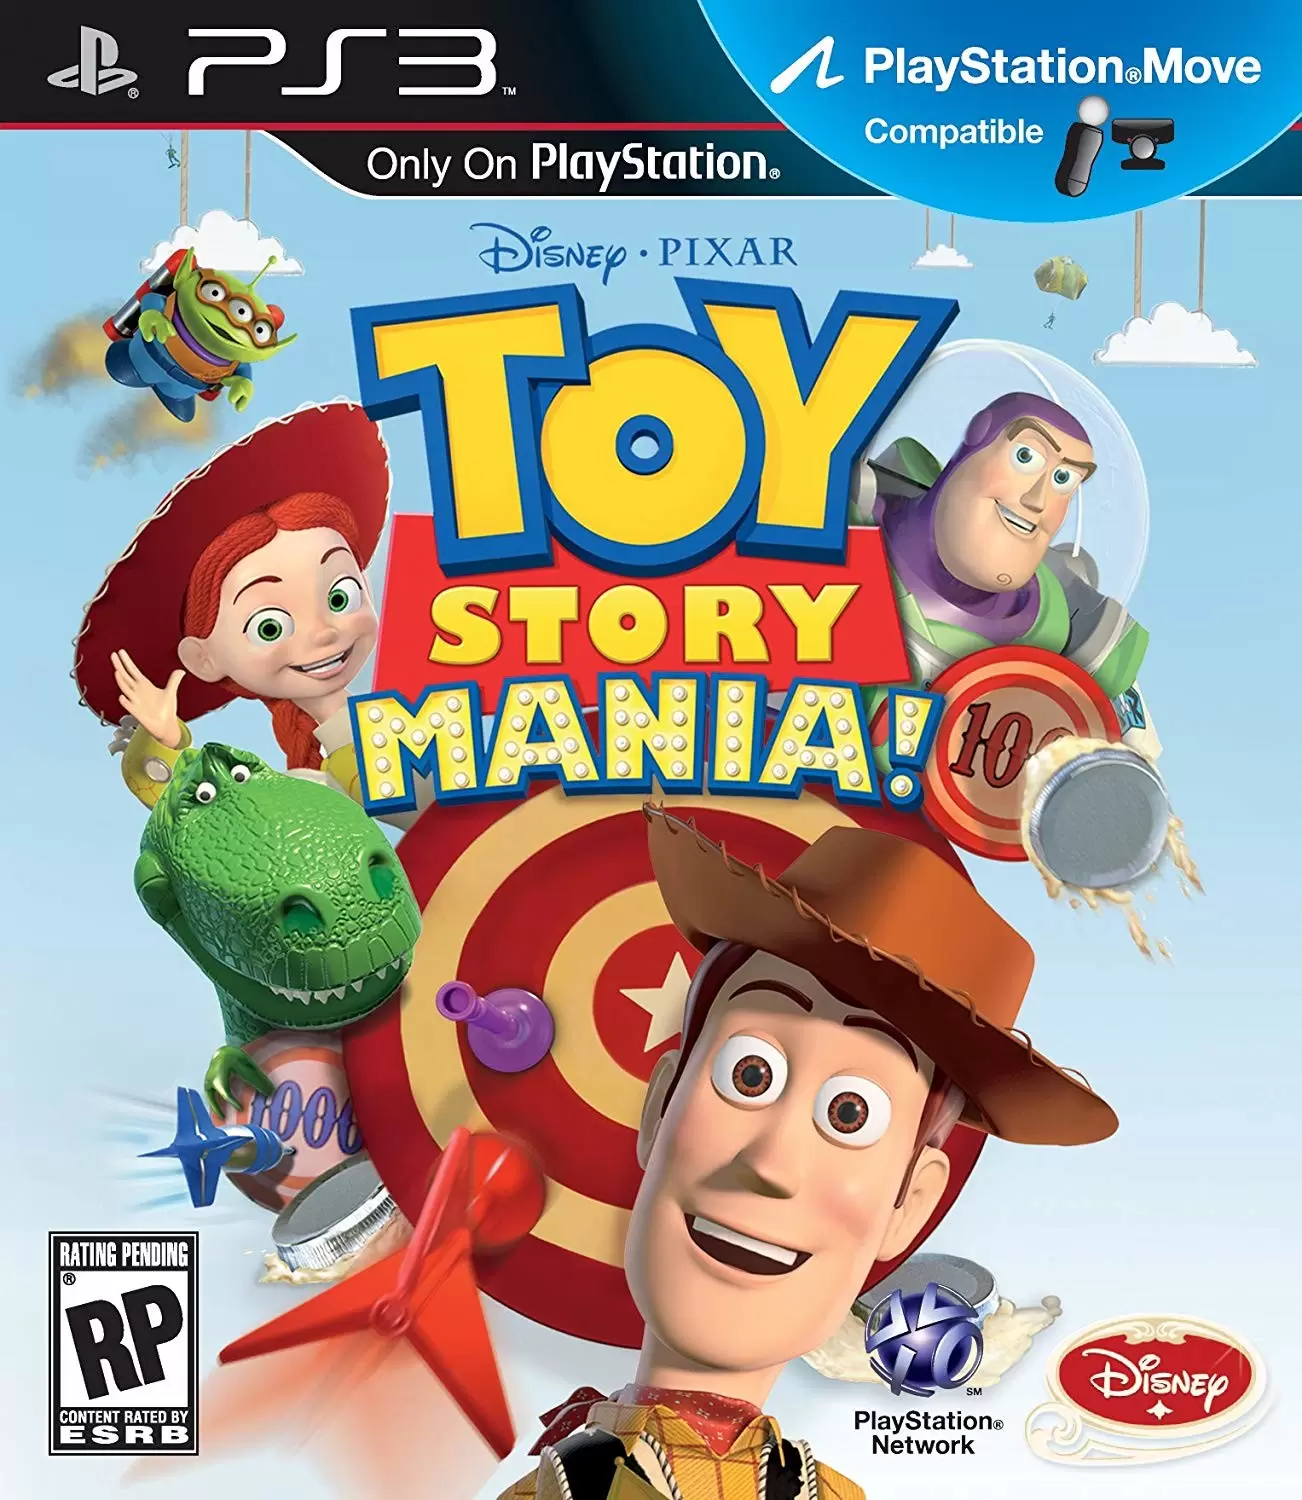 PS3 Games - Toy Story Mania